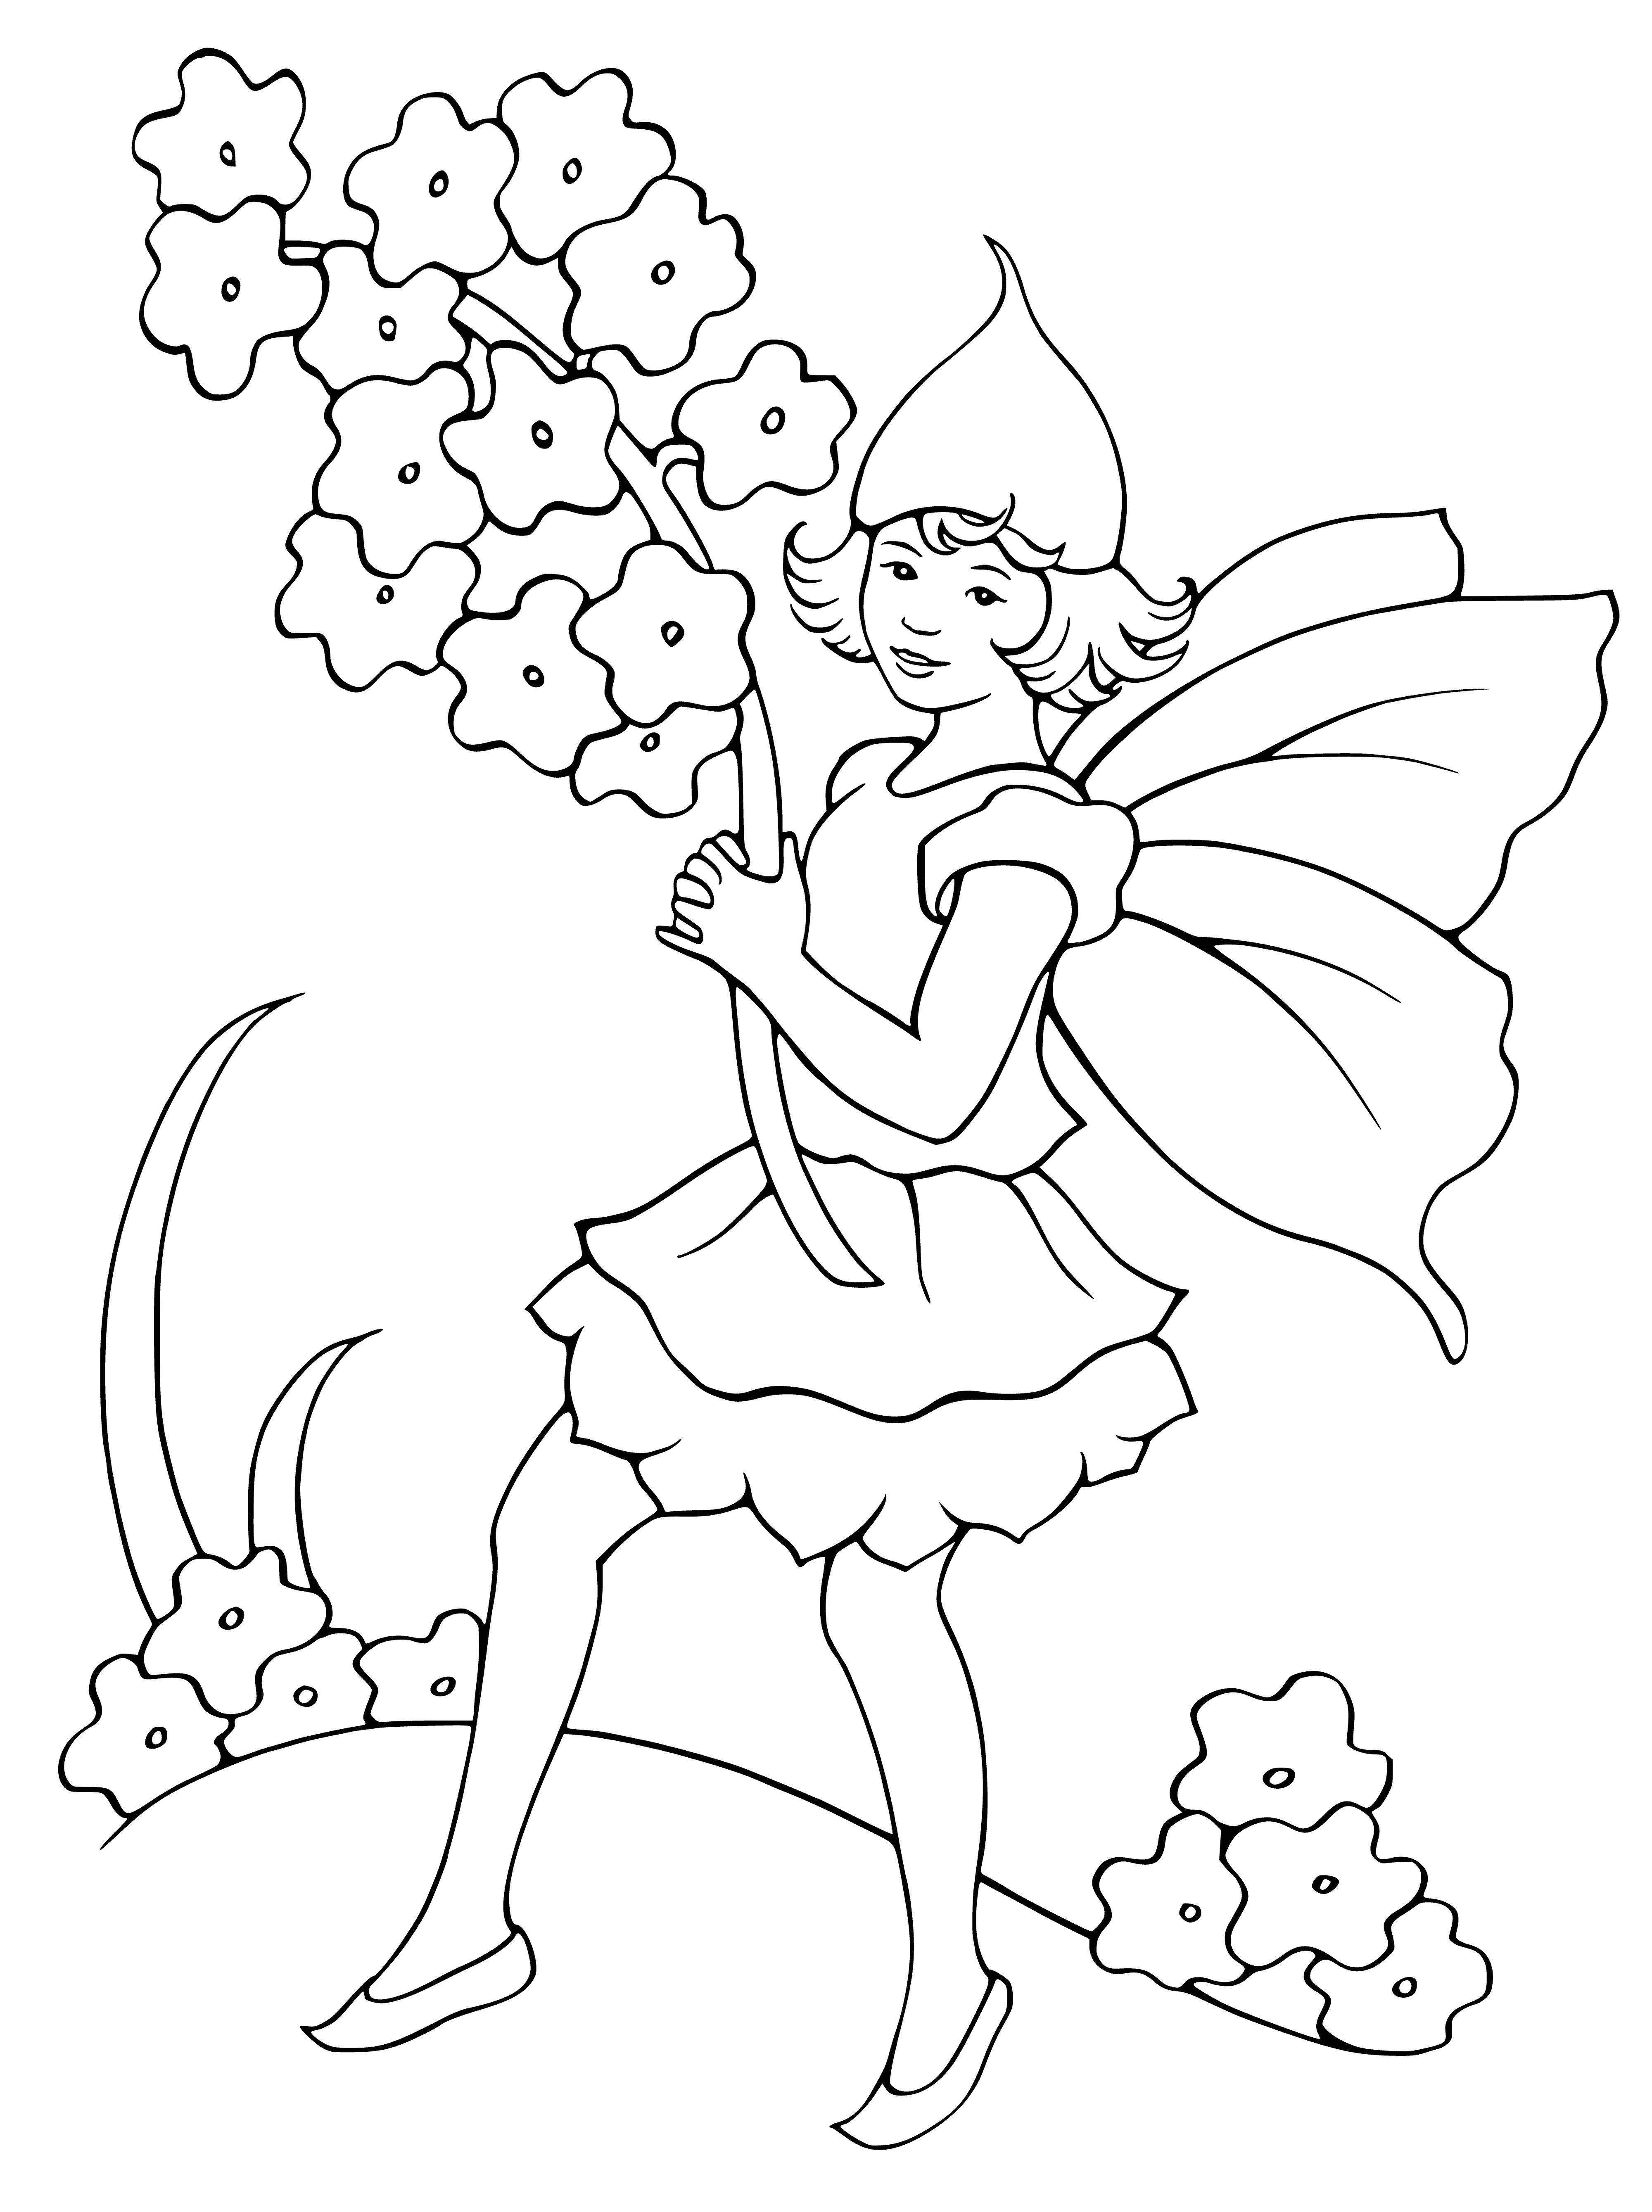 coloring page: Elf girl dress, wand in hand, standing in front of a rainbow. #fantasy